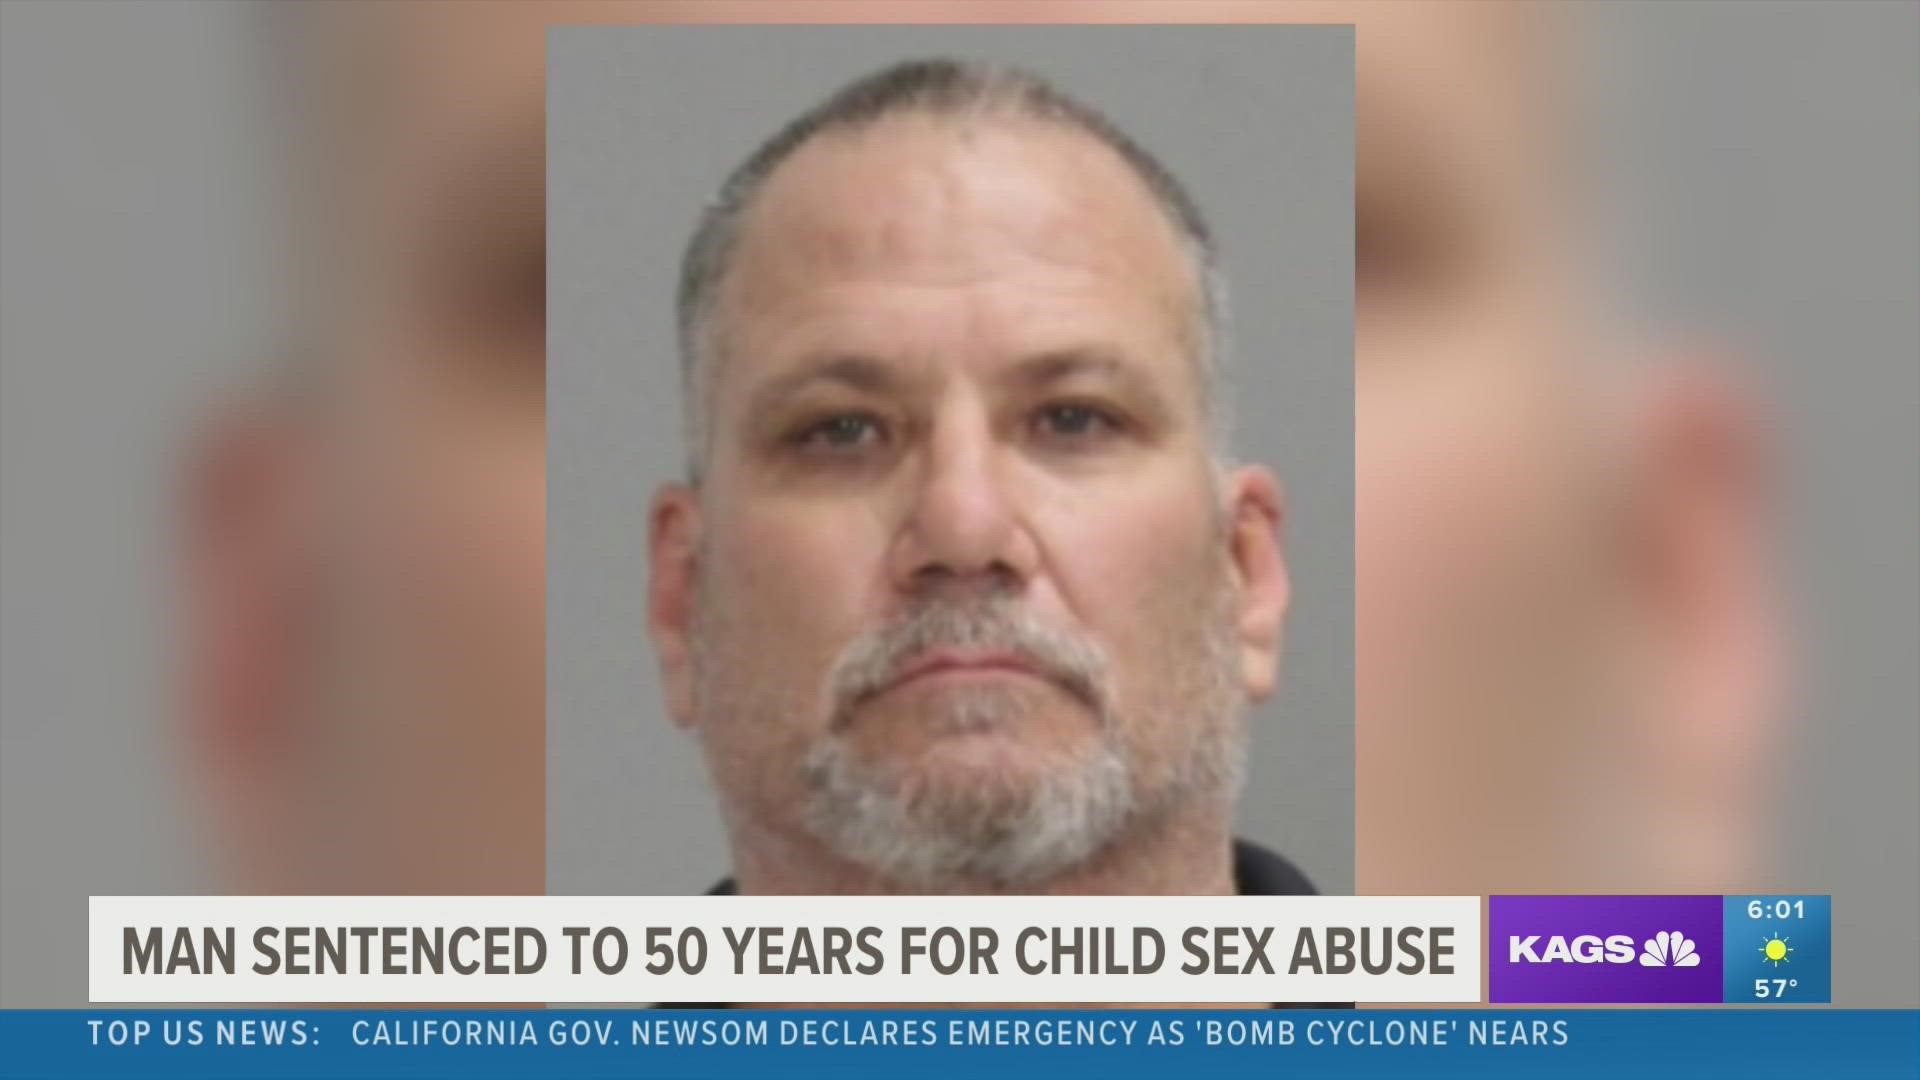 1920px x 1080px - Authorities: Man given 50 year sentence for child sexual crimes | kagstv.com